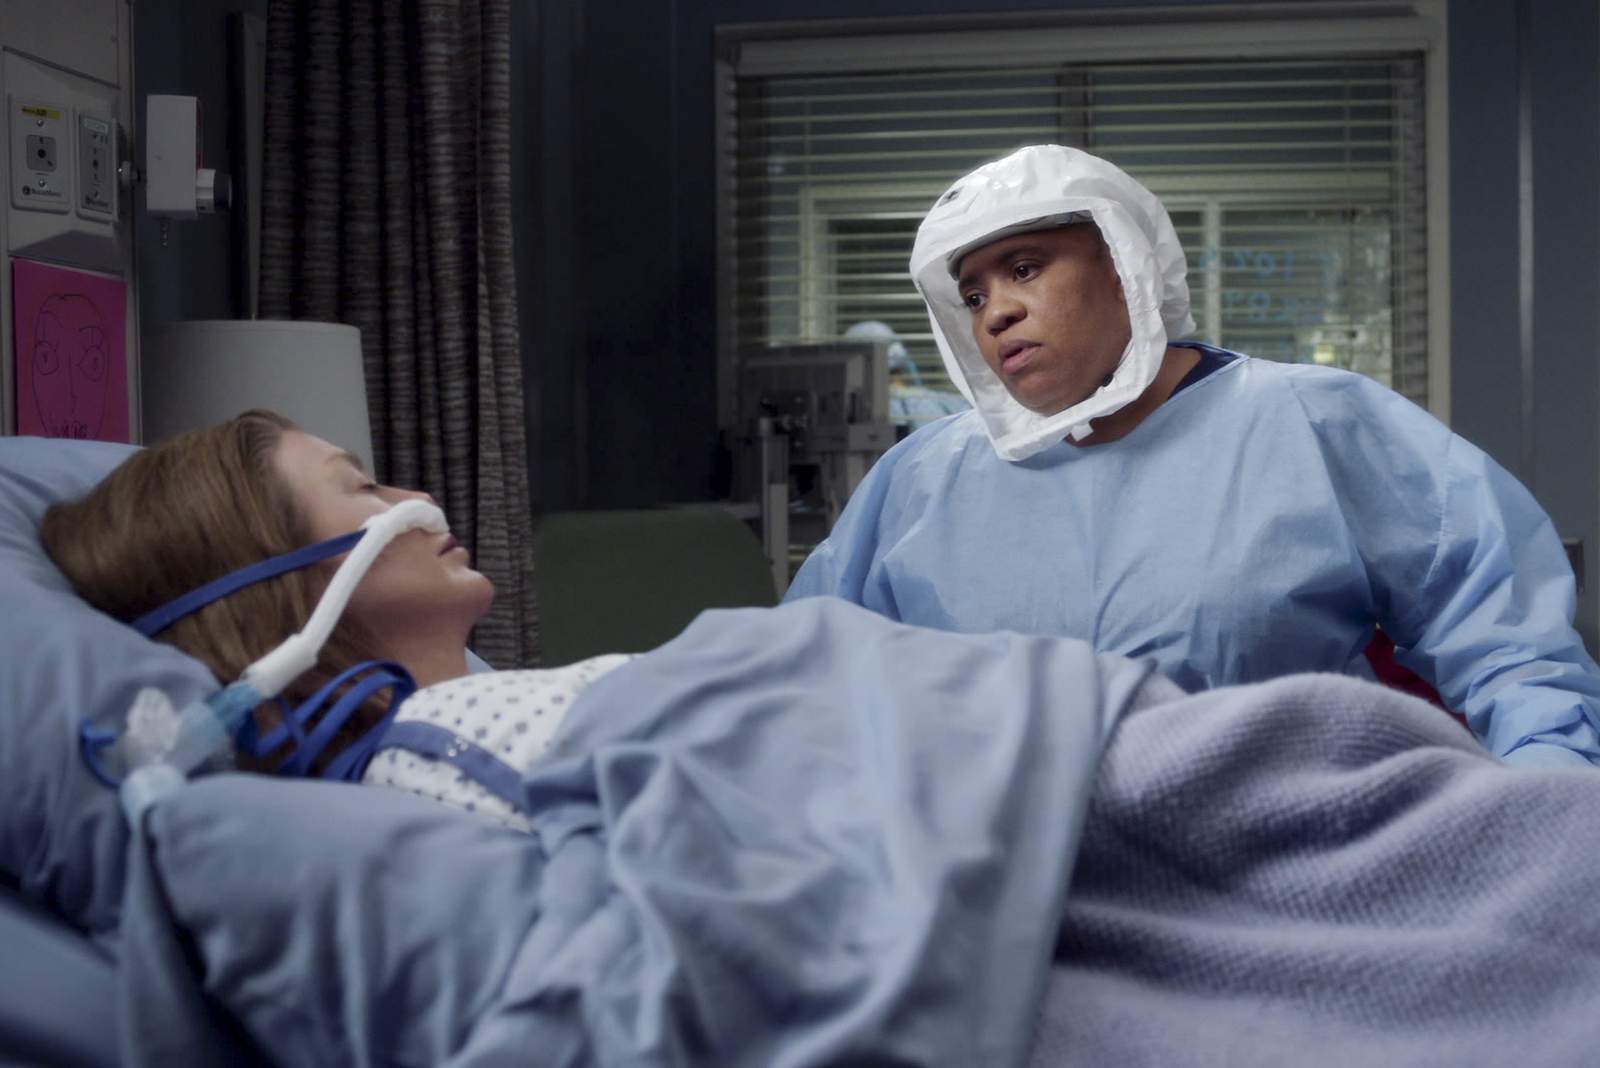 As 'Grey's' returns, Wilson says it has connected viewers